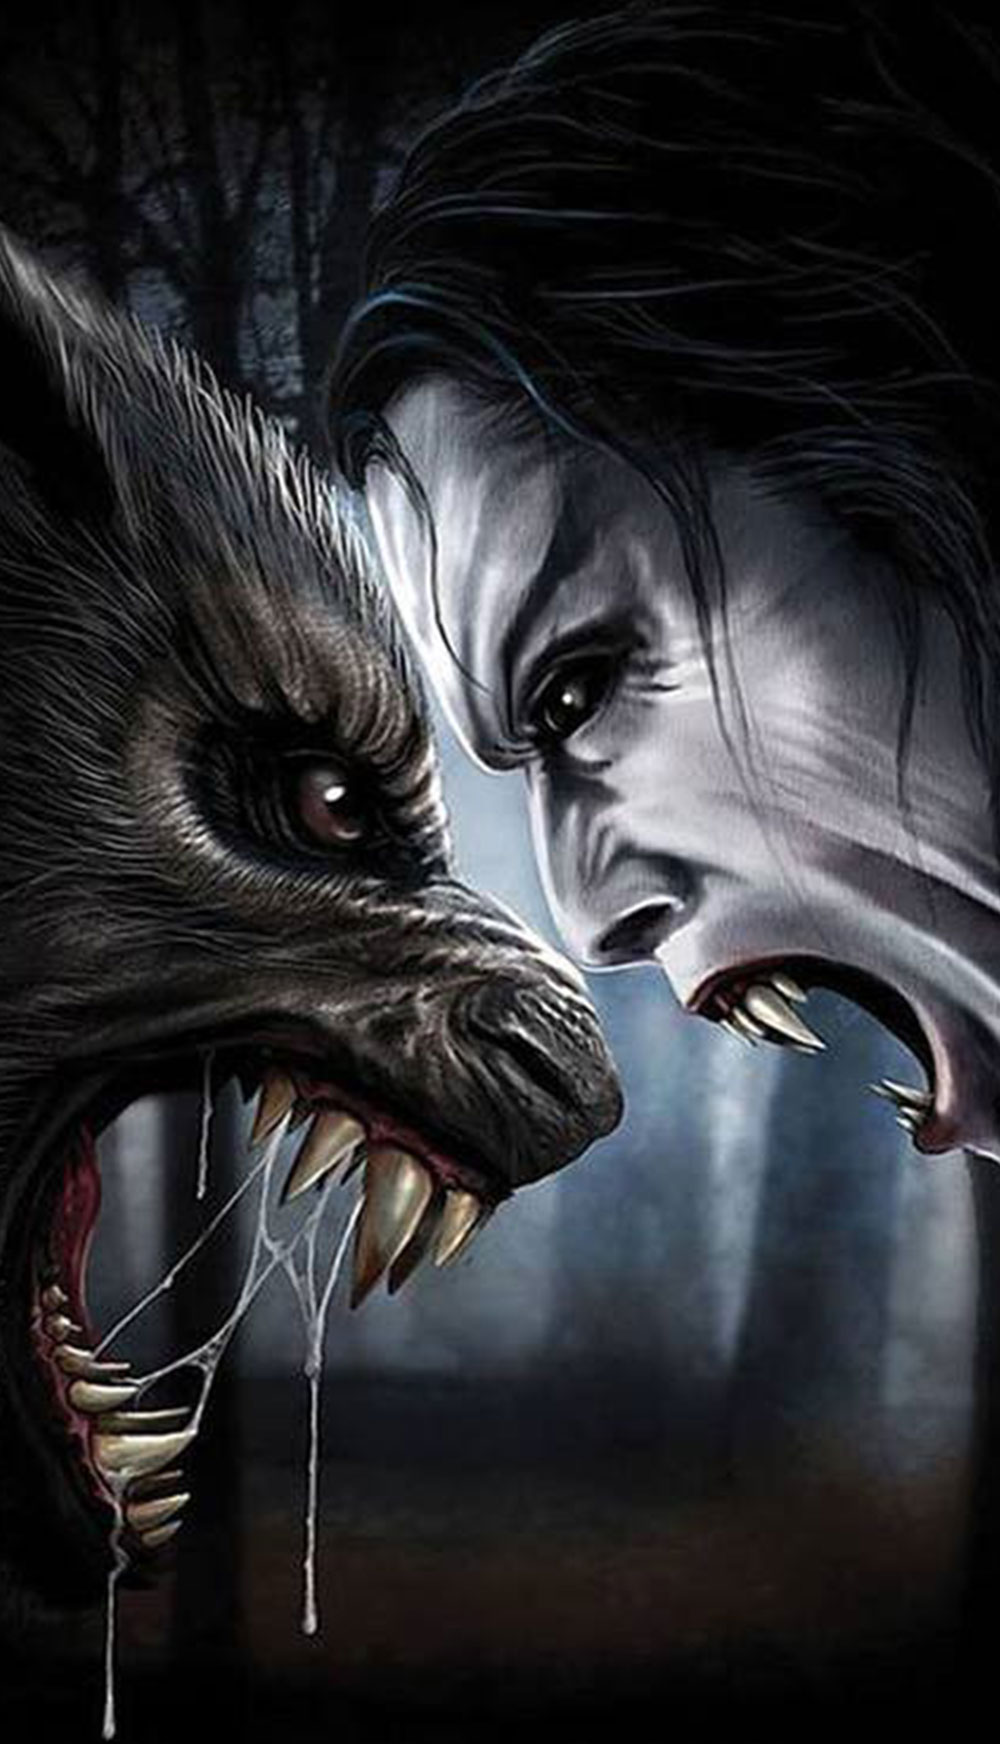 Comparing Vampires and Werewolves